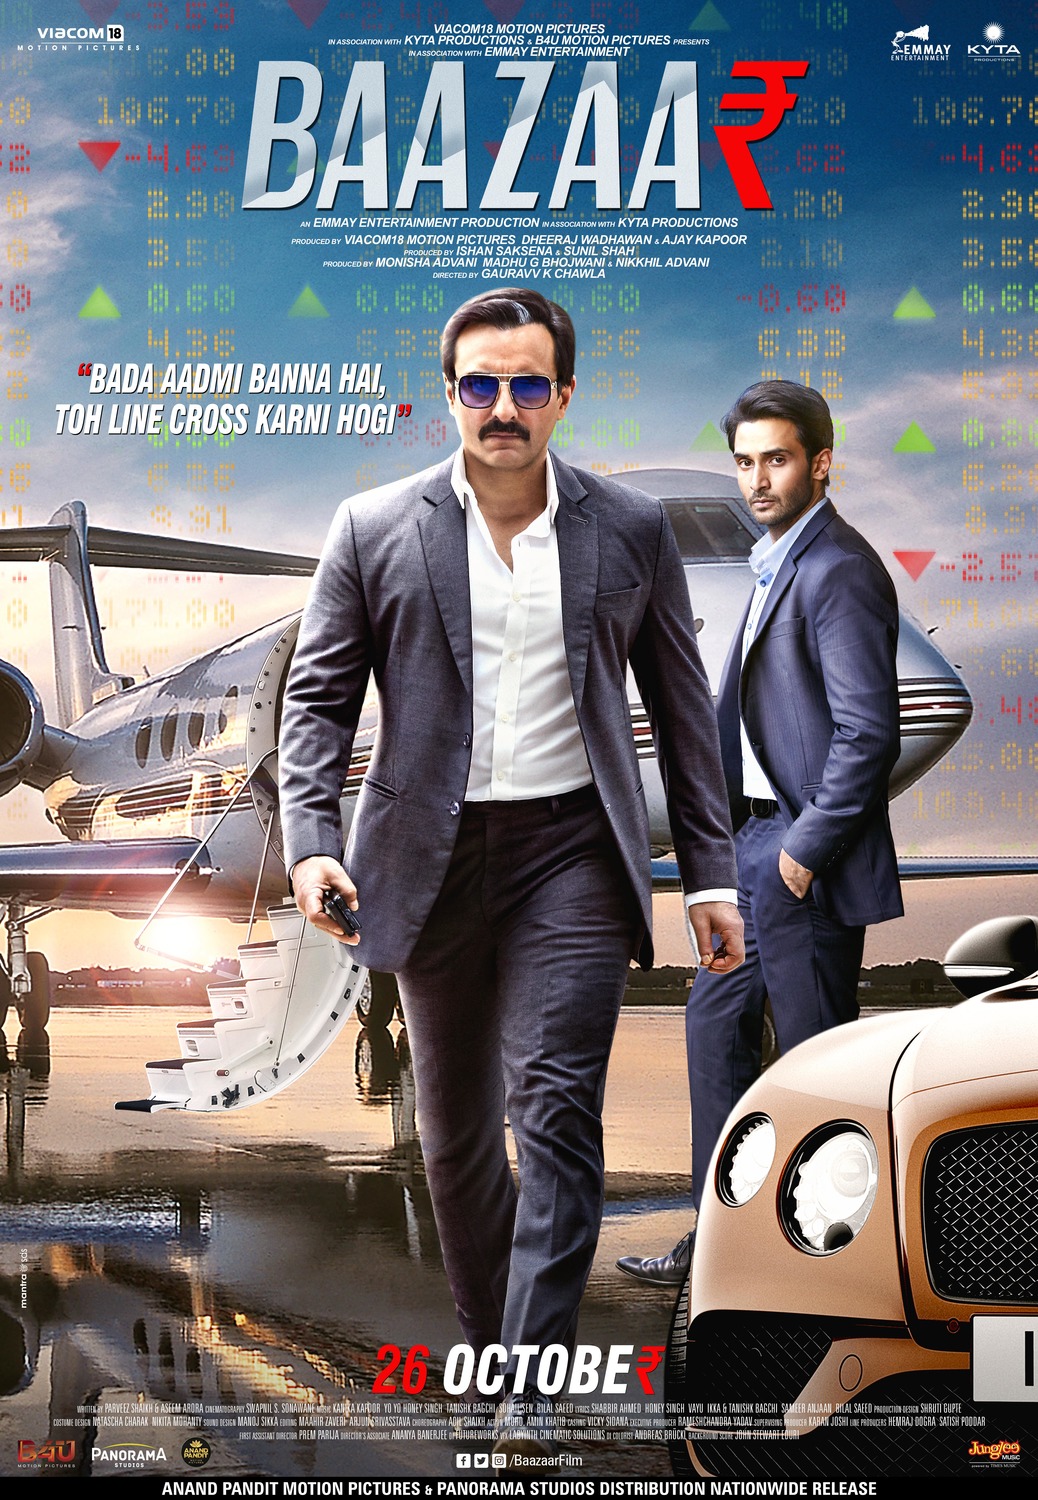 Extra Large Movie Poster Image for Baazaar 